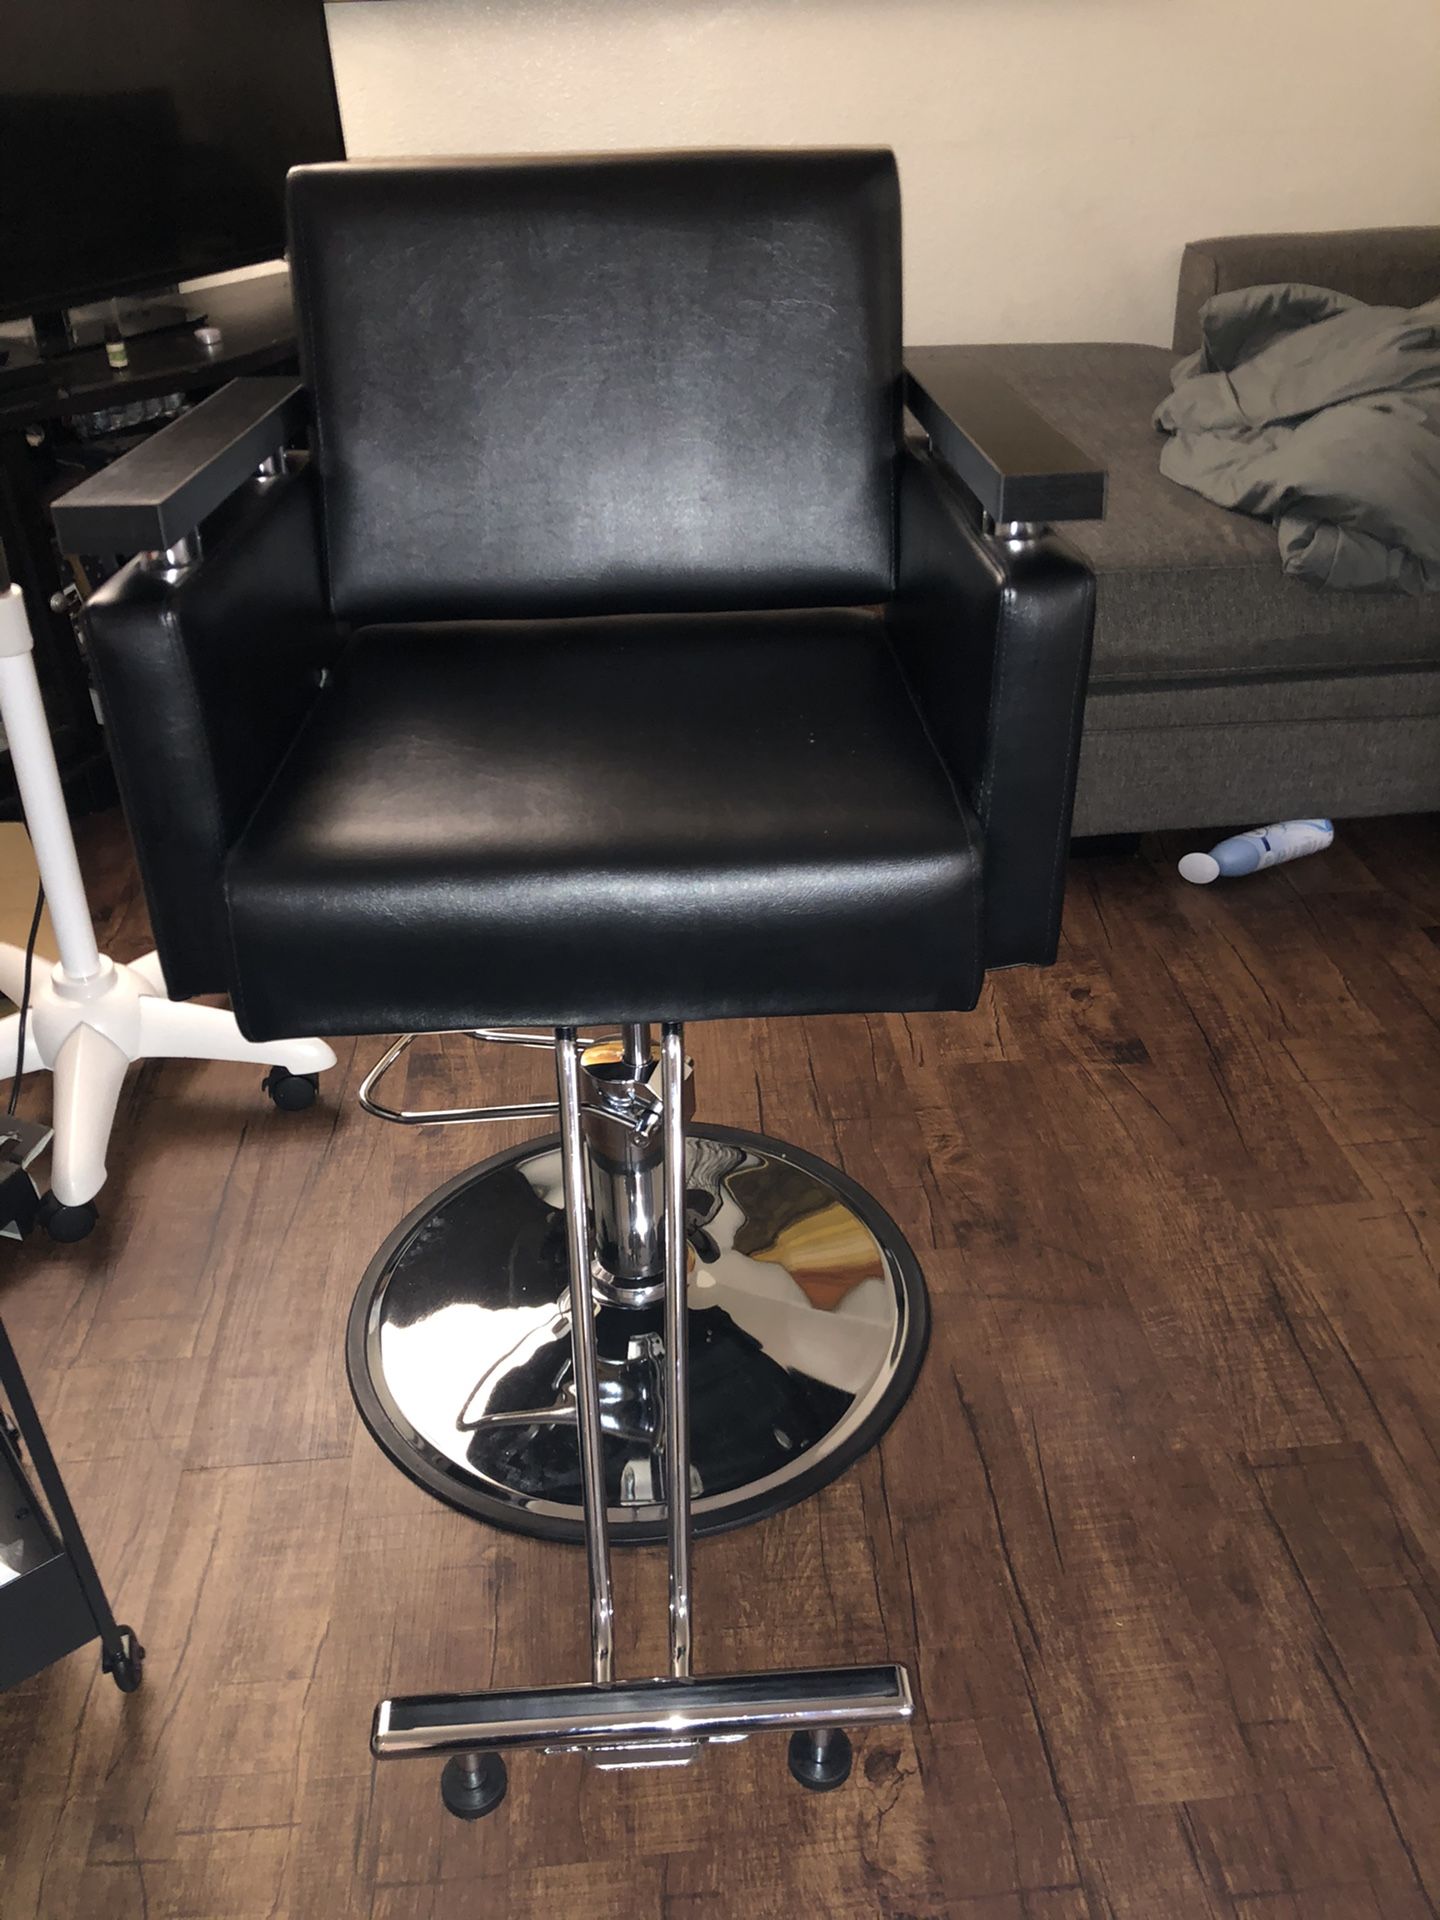 Brand new height adjustable barber chair